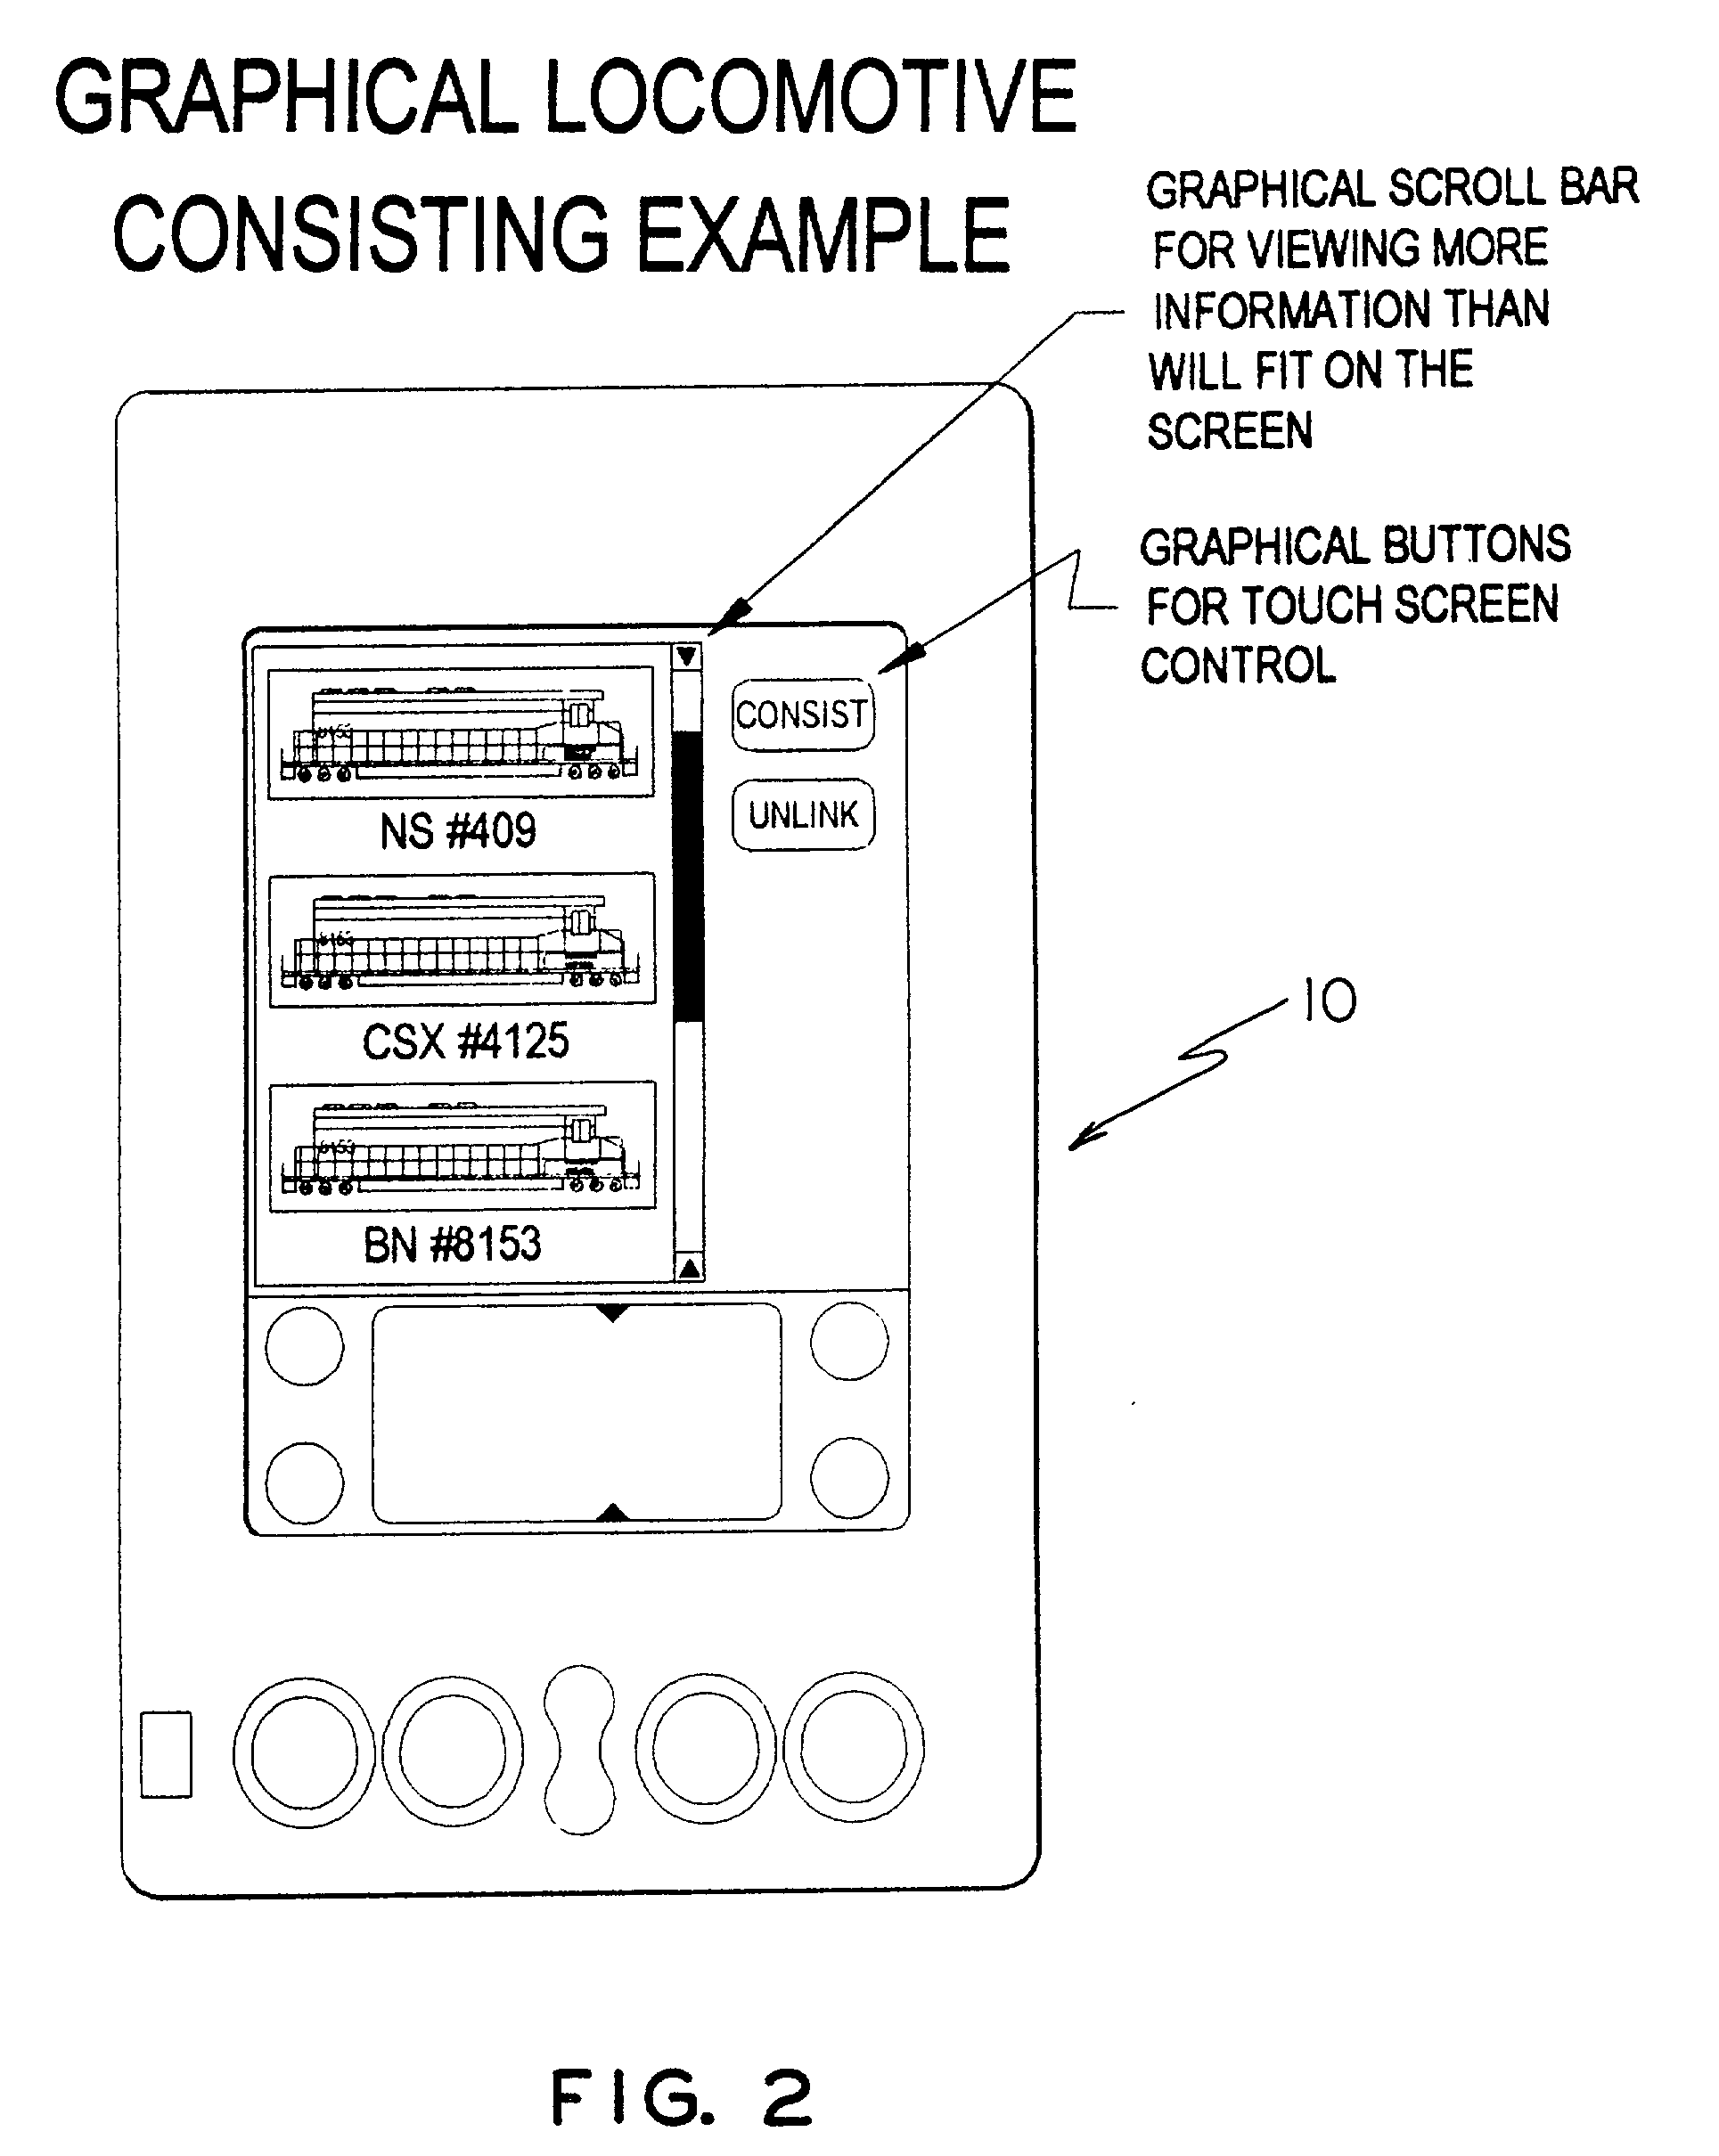 Method of and an apparatus for using a graphical handheld computer for model railroad programming and control